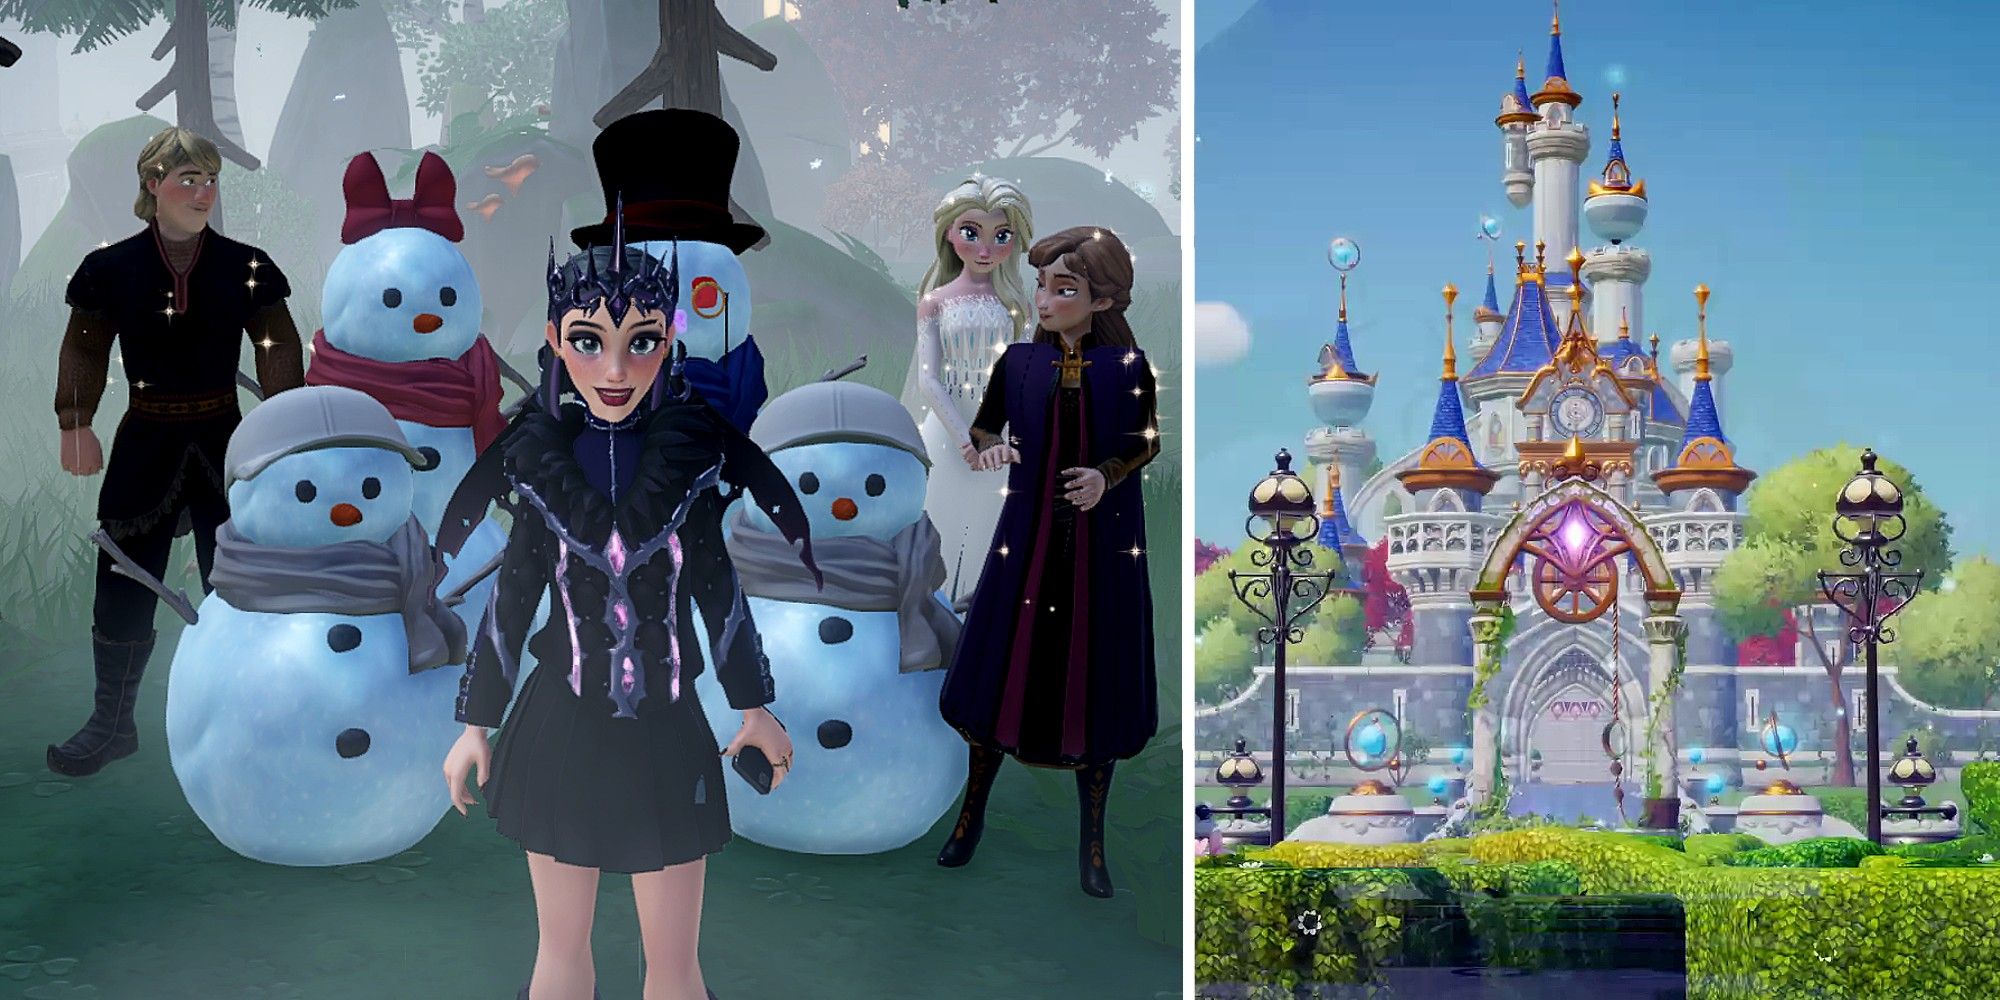 The Founder with the cast of Frozen and the enchanted castle in Dreamlight Valley